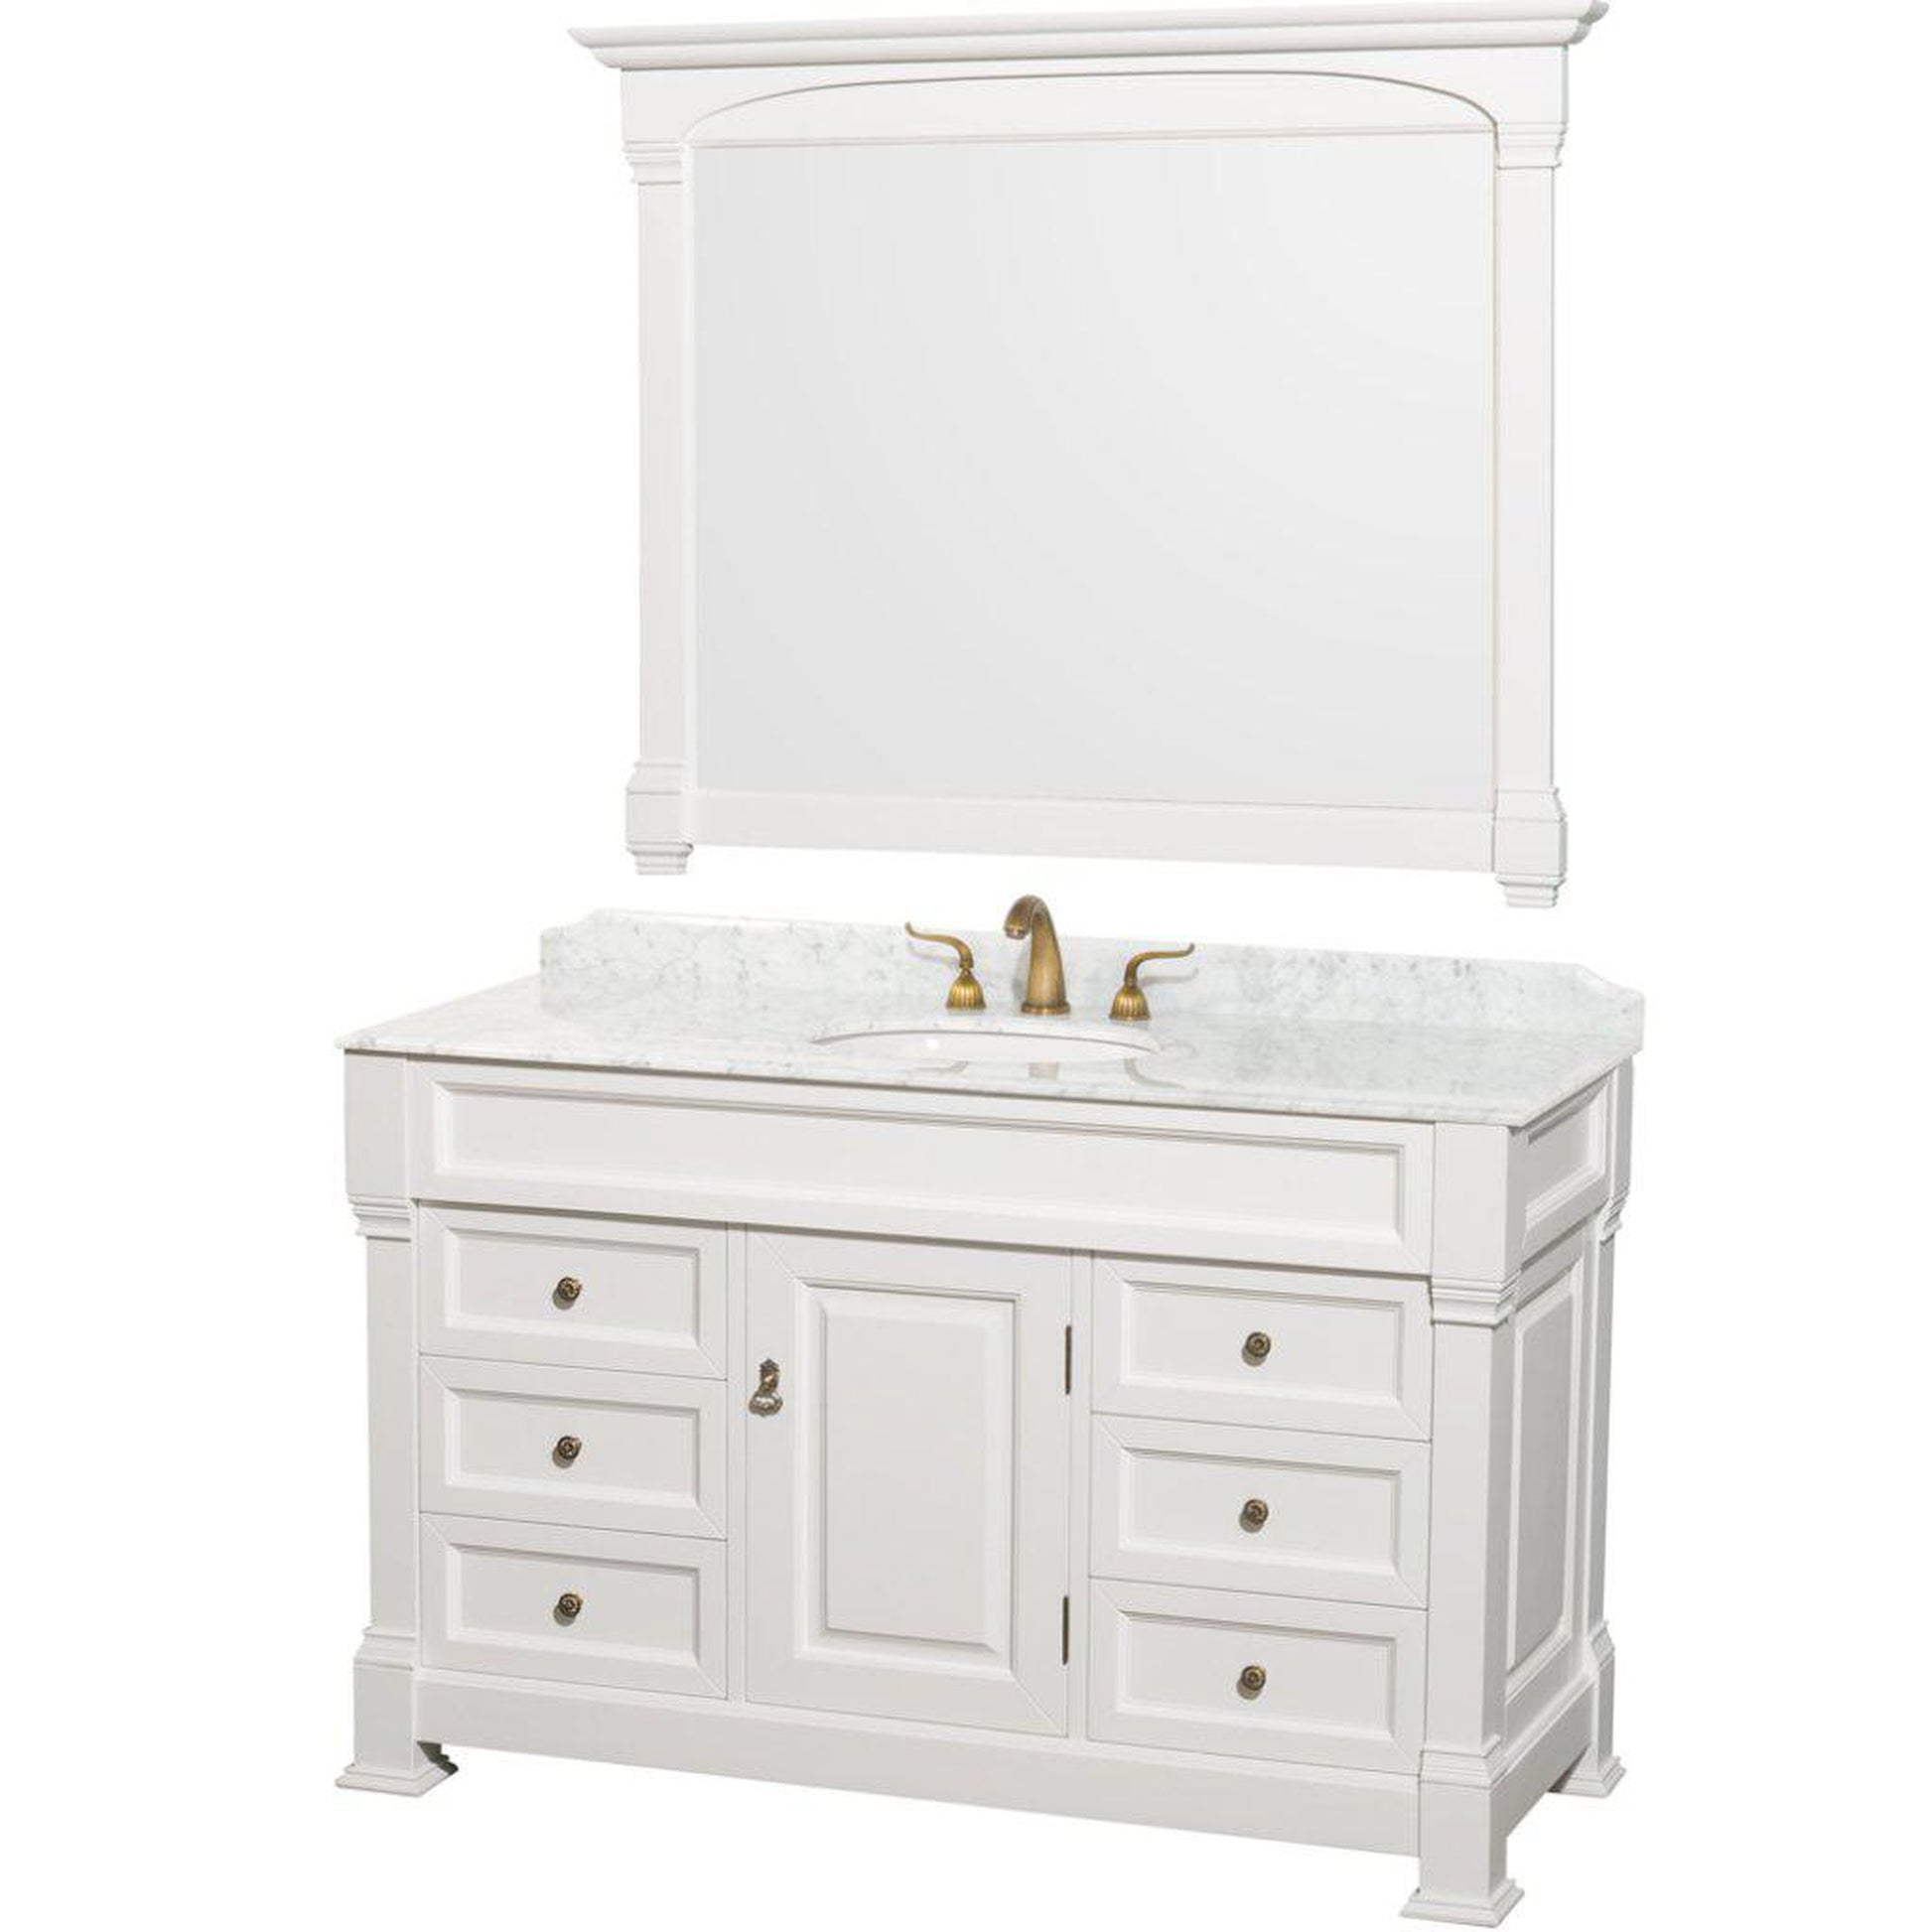 Wyndham Collection Andover 55" Single Bathroom White Vanity Set With White Carrara Marble Countertop And Undermount Oval Sink, And 50" Mirror